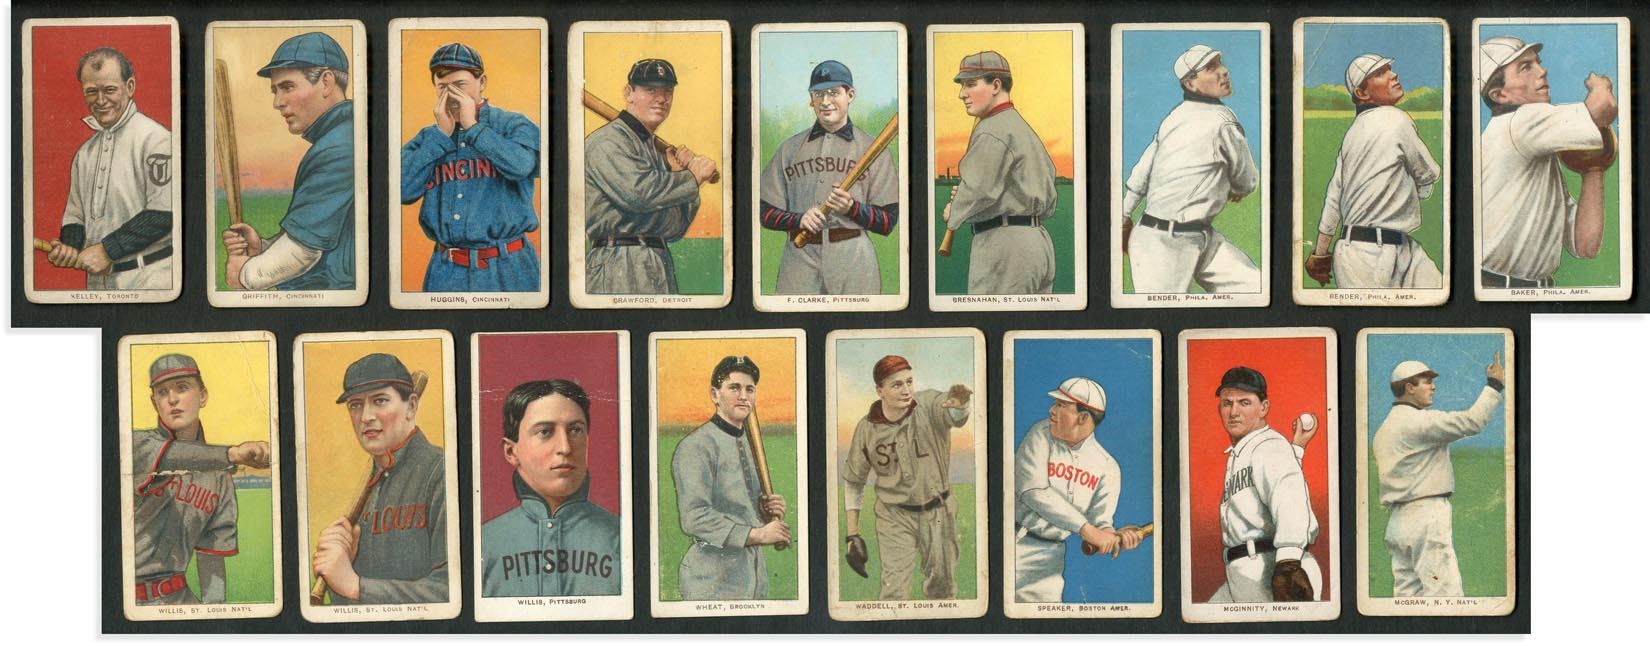 Baseball and Trading Cards - 1909-11 T206 Collection (250 Cards) with 17 HOFers